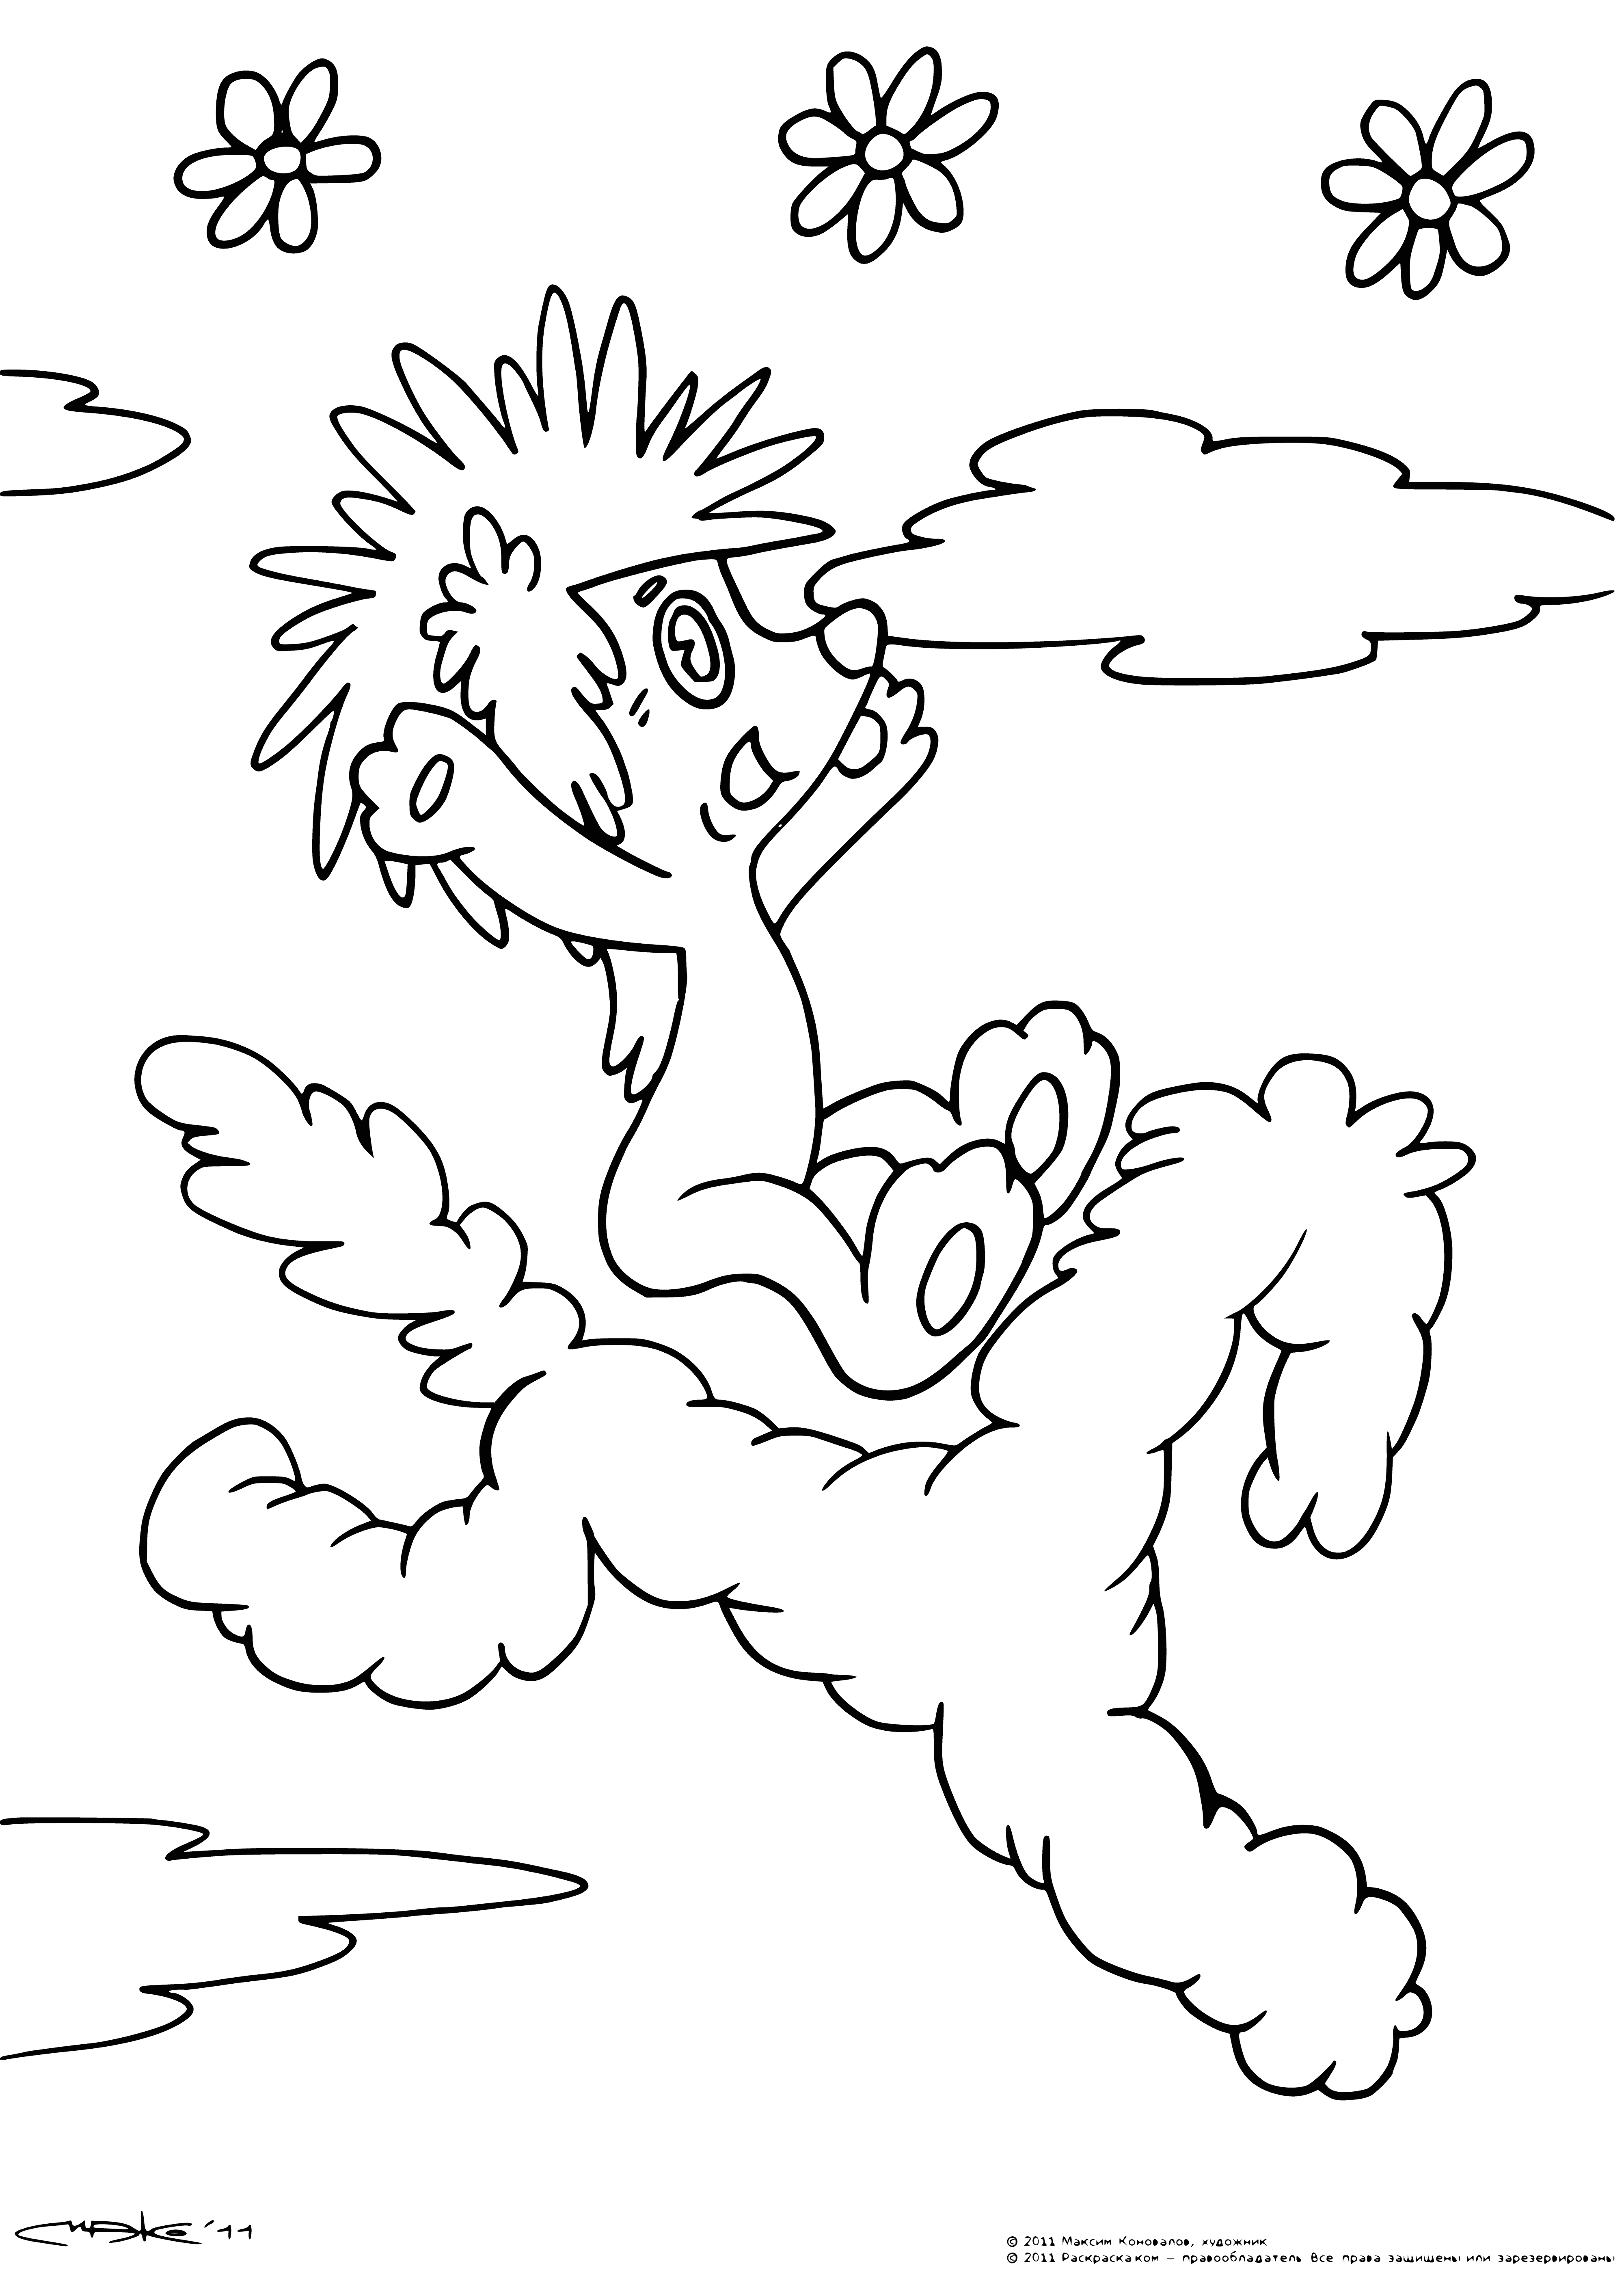 coloring page: The hedgehog and bear gaze up at white-maned horses in the sky under a cloud tree.